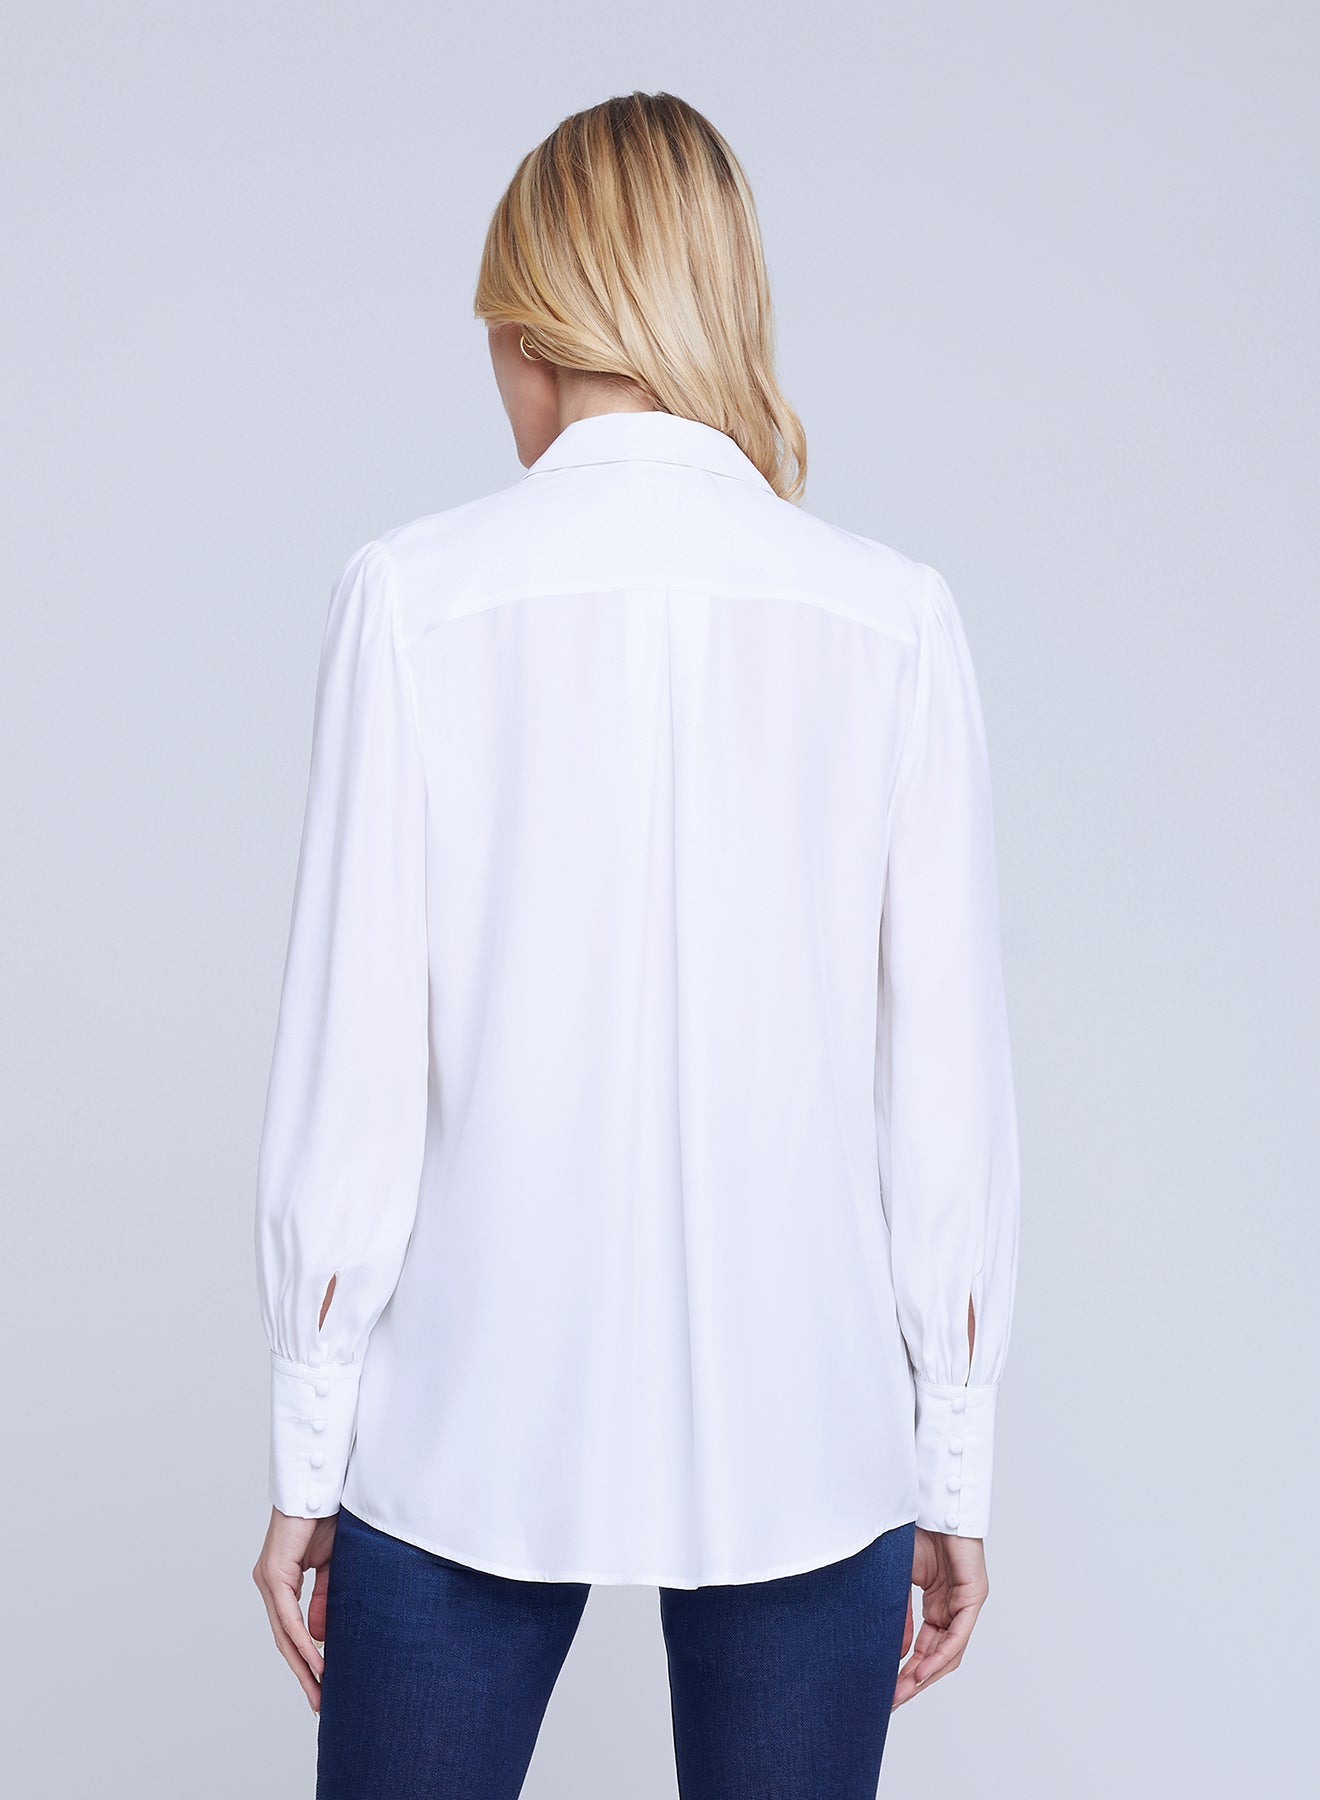 Fabienne Tunic by L'agence